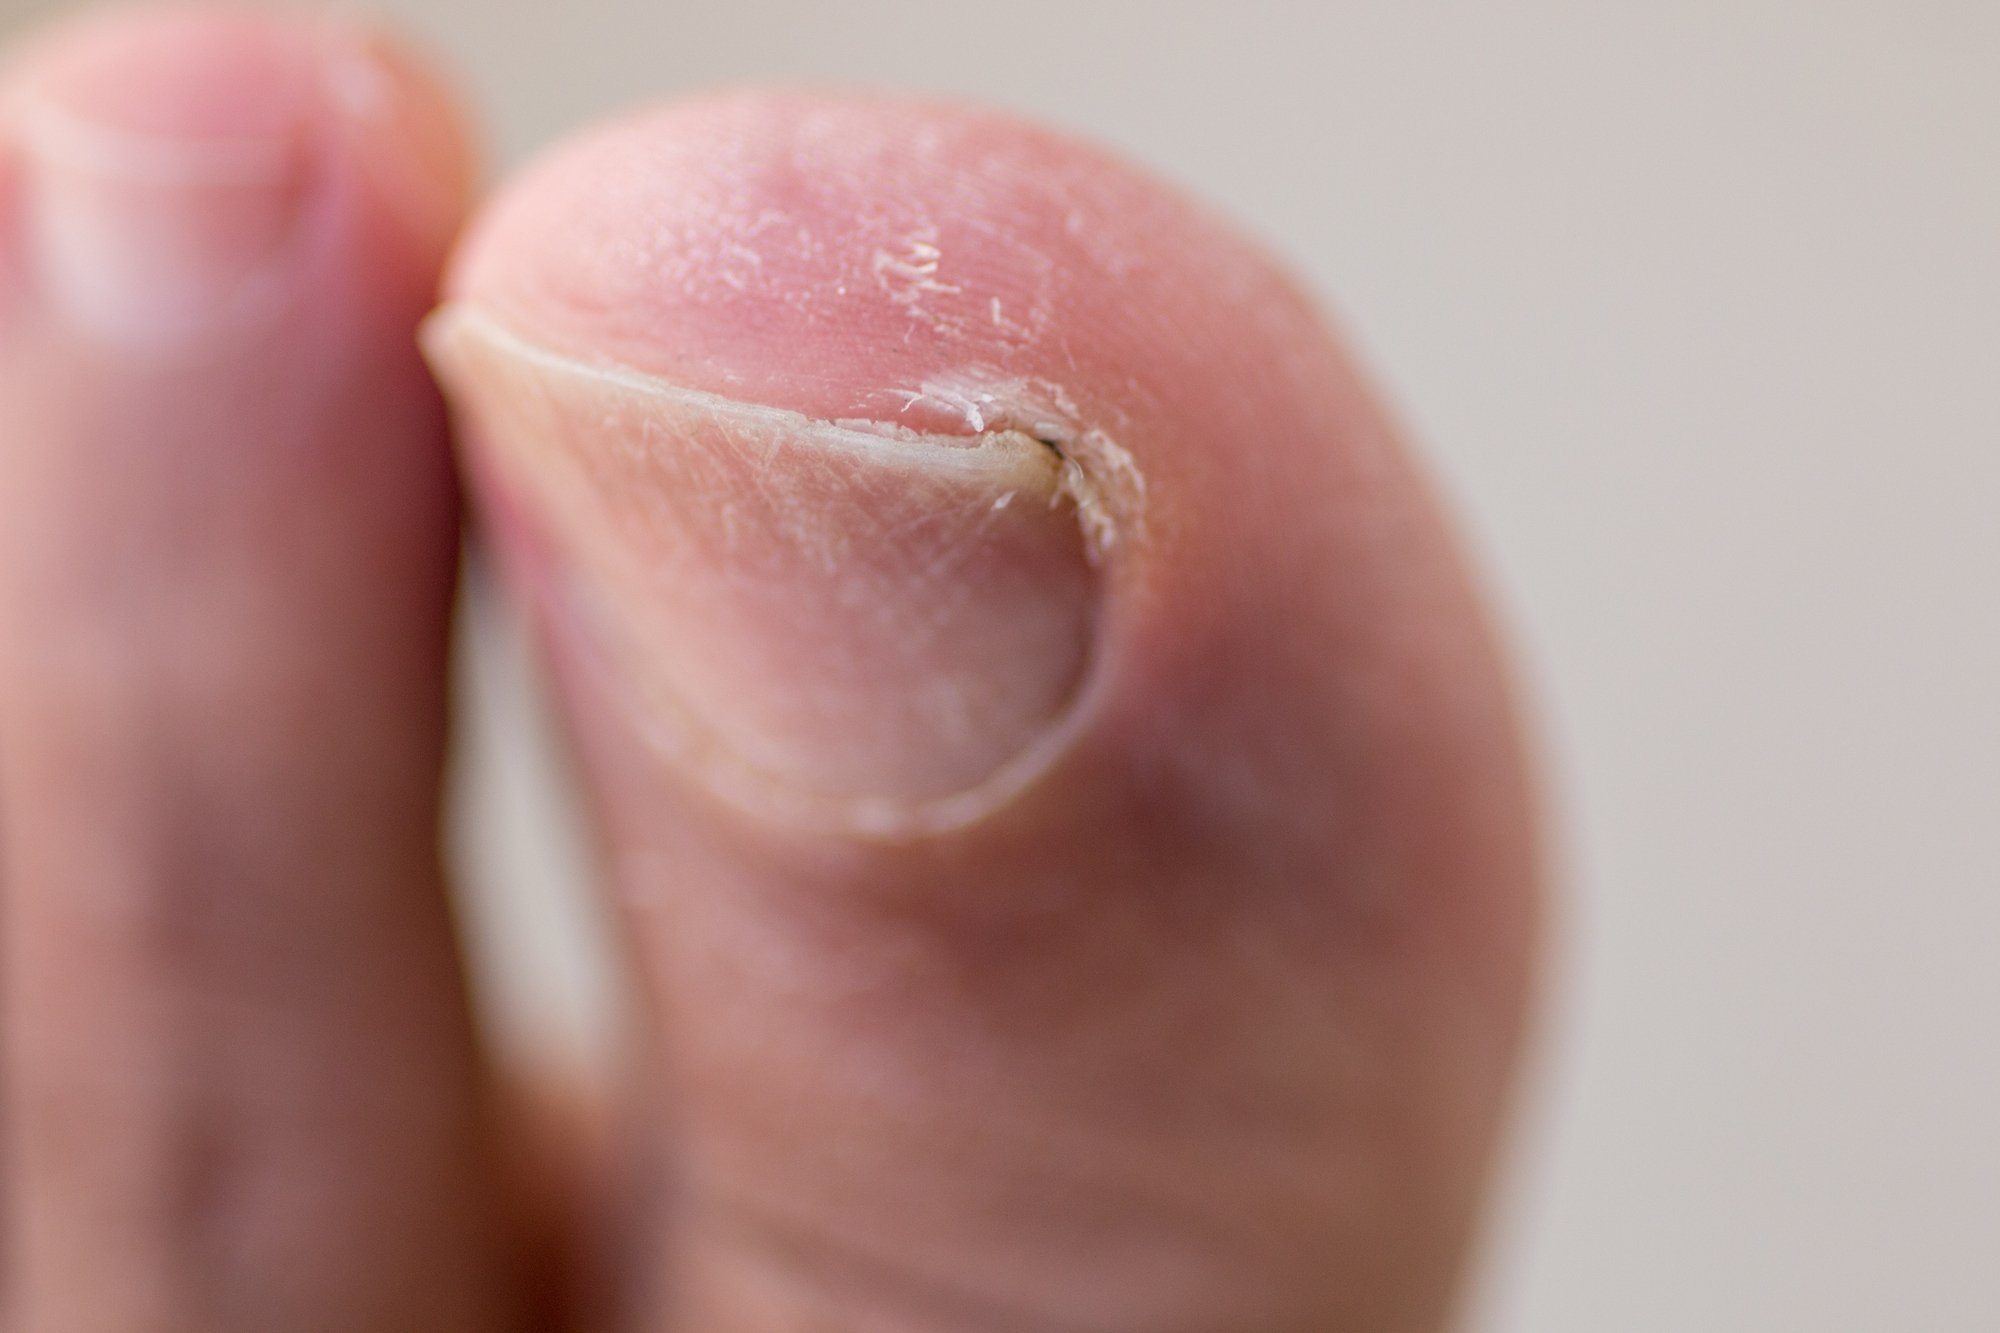 A Permanent Solution for Treating Recurring Ingrown Toenails - YouTube